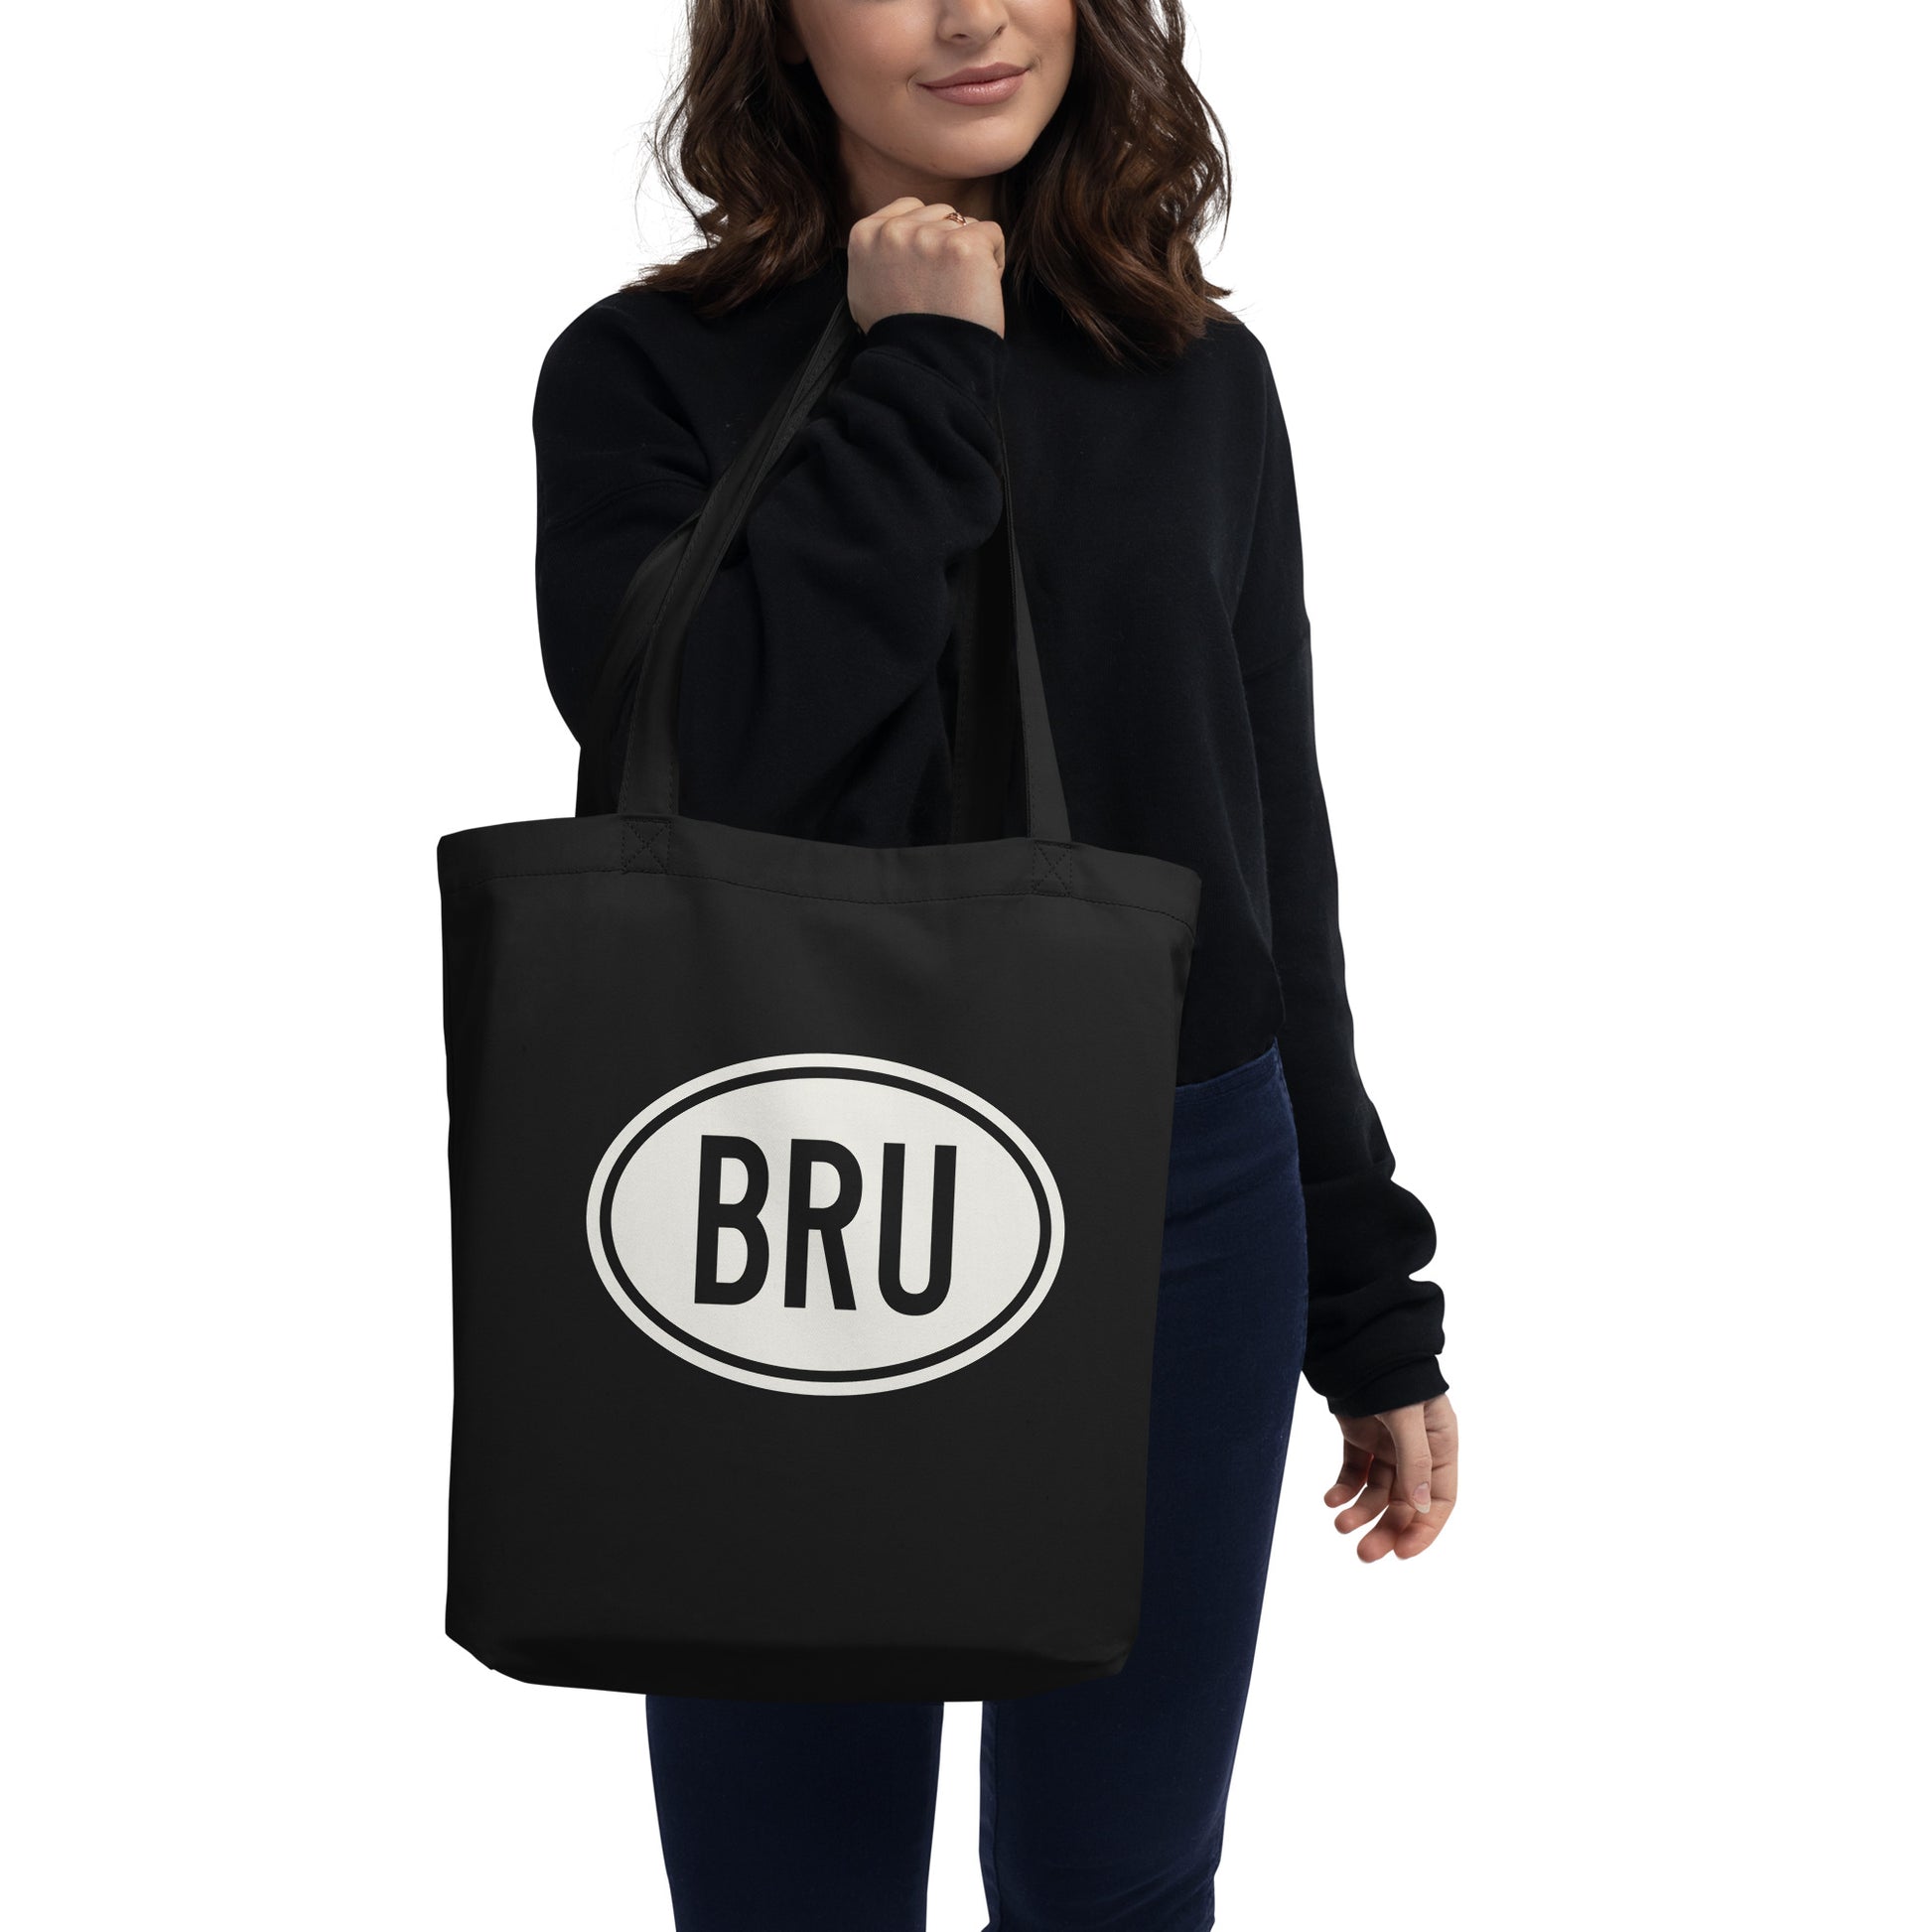 Unique Travel Gift Organic Tote - White Oval • BRU Brussels • YHM Designs - Image 03